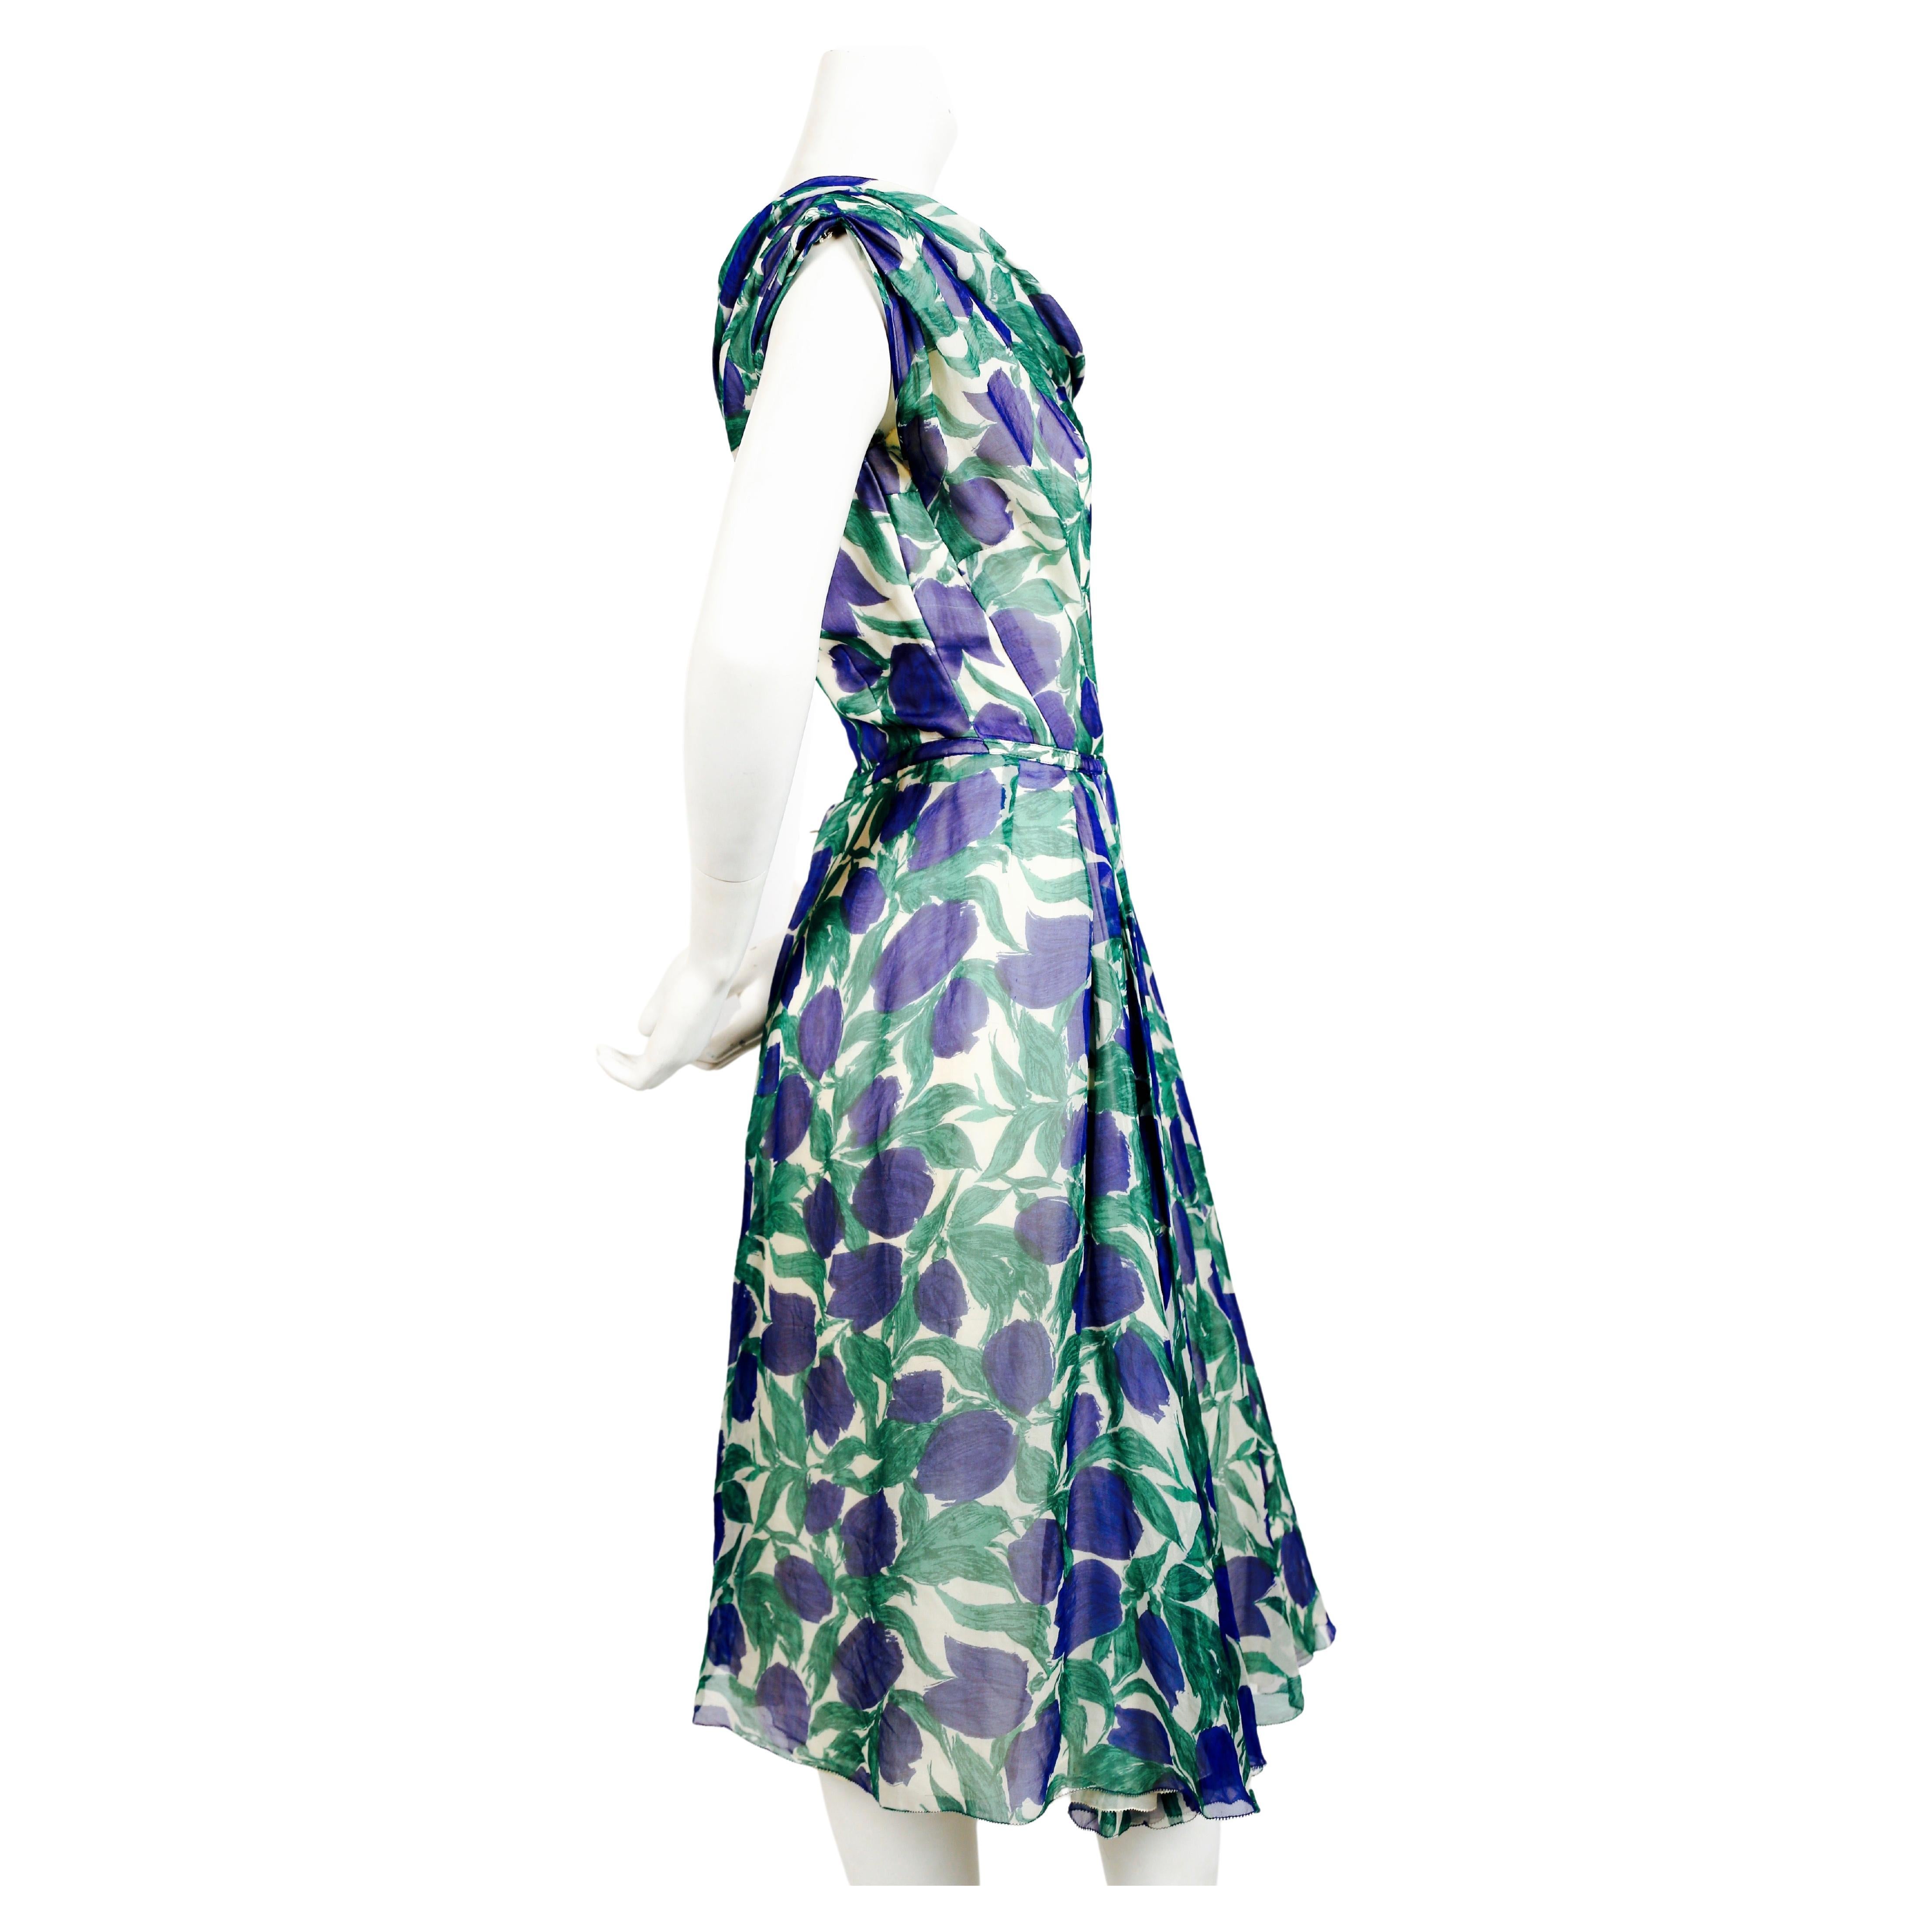 Beautiful, vibrant, floral printed silk chiffon dress from Bonwit Teller dating to the 1950's. Best fits a US size 4 or 6. Approximate measurements: bust 35